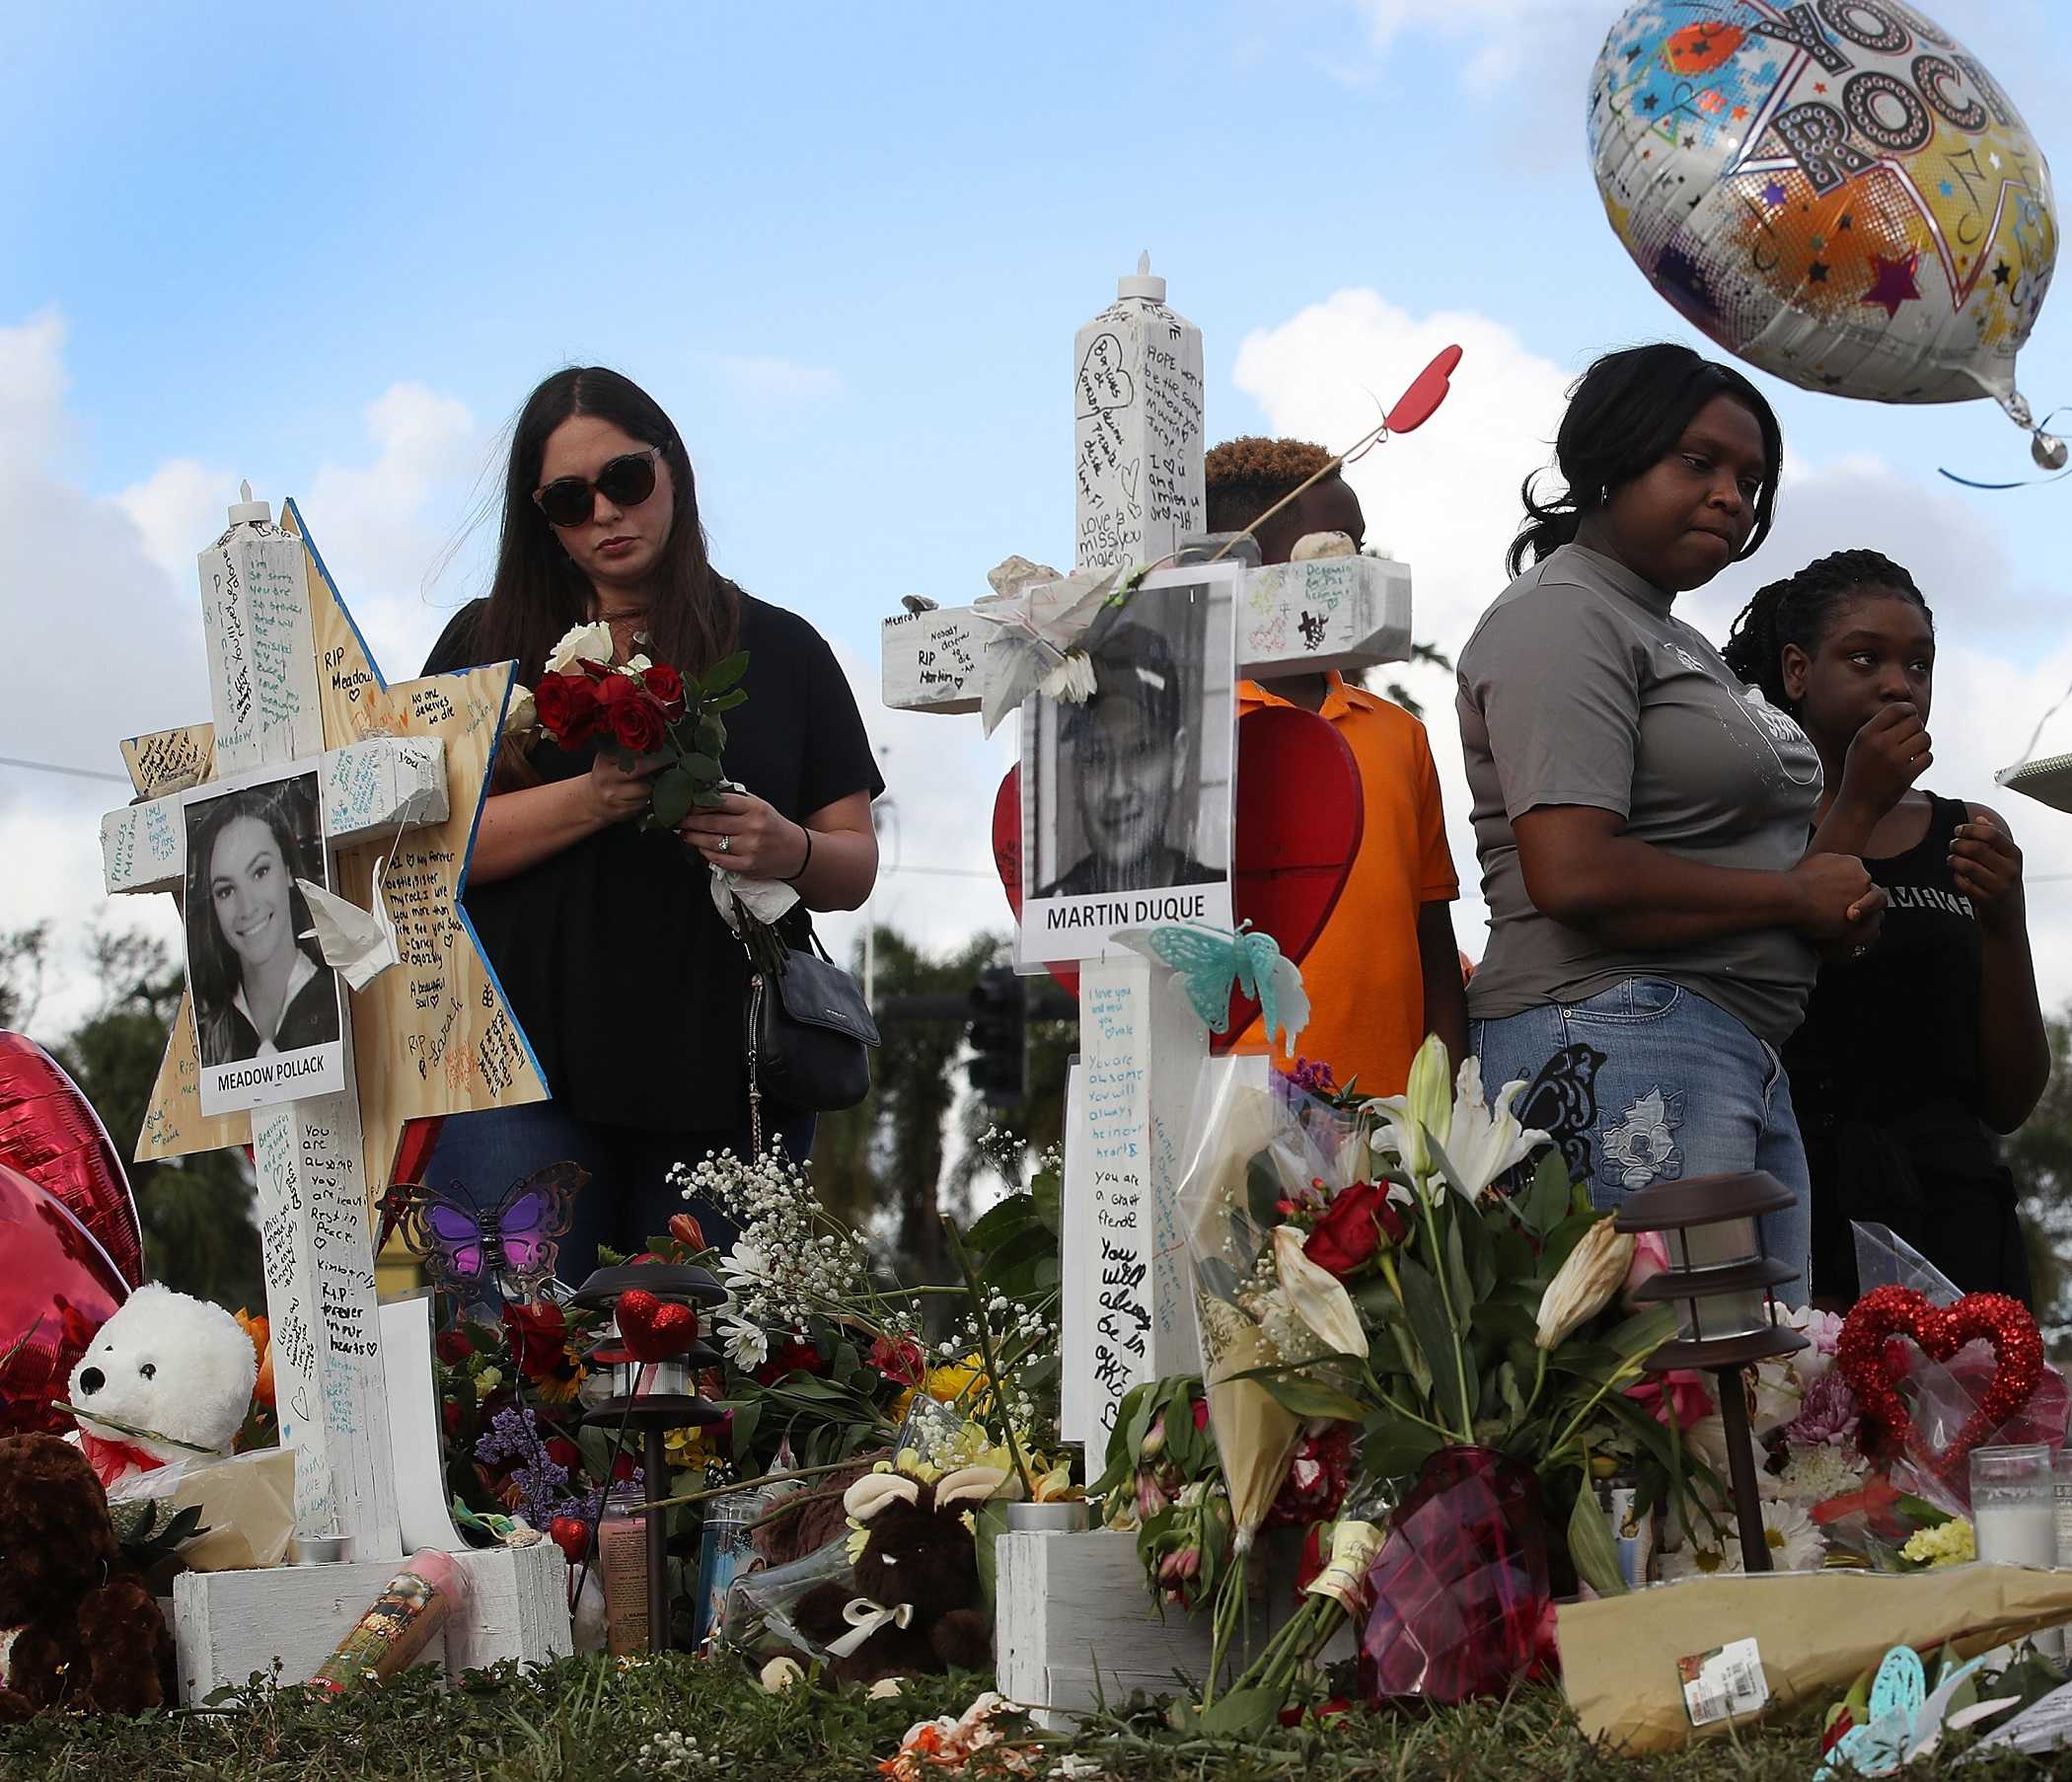 The aftermath: Grieving teens, raw emotions following Florida school shooting